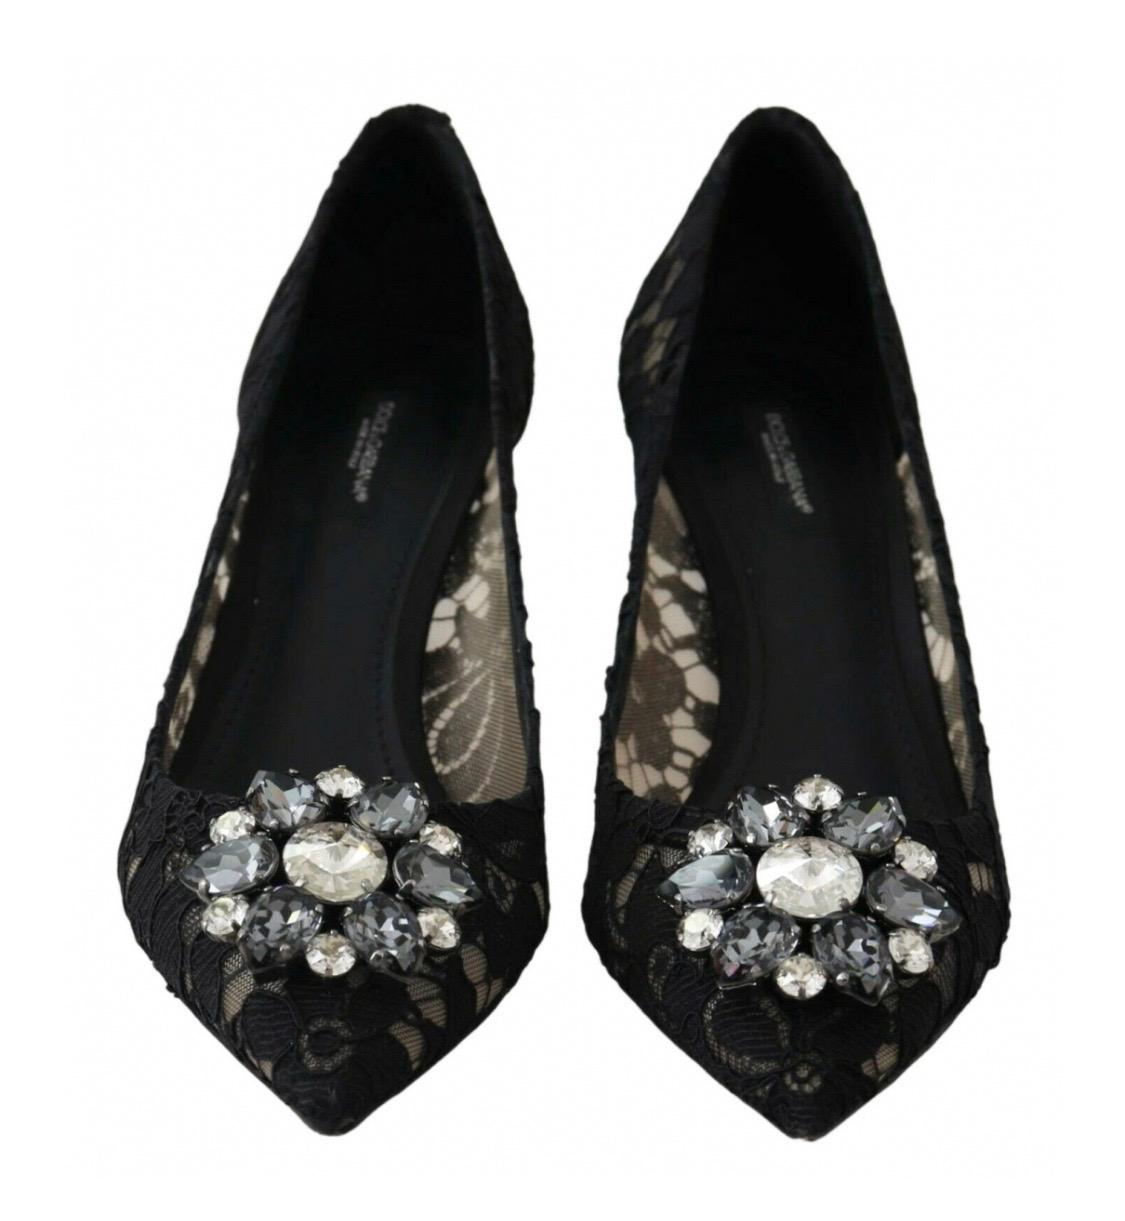 Dolce & Gabbana black  PUMP lace shoes with jewel
detail on the top heels  2